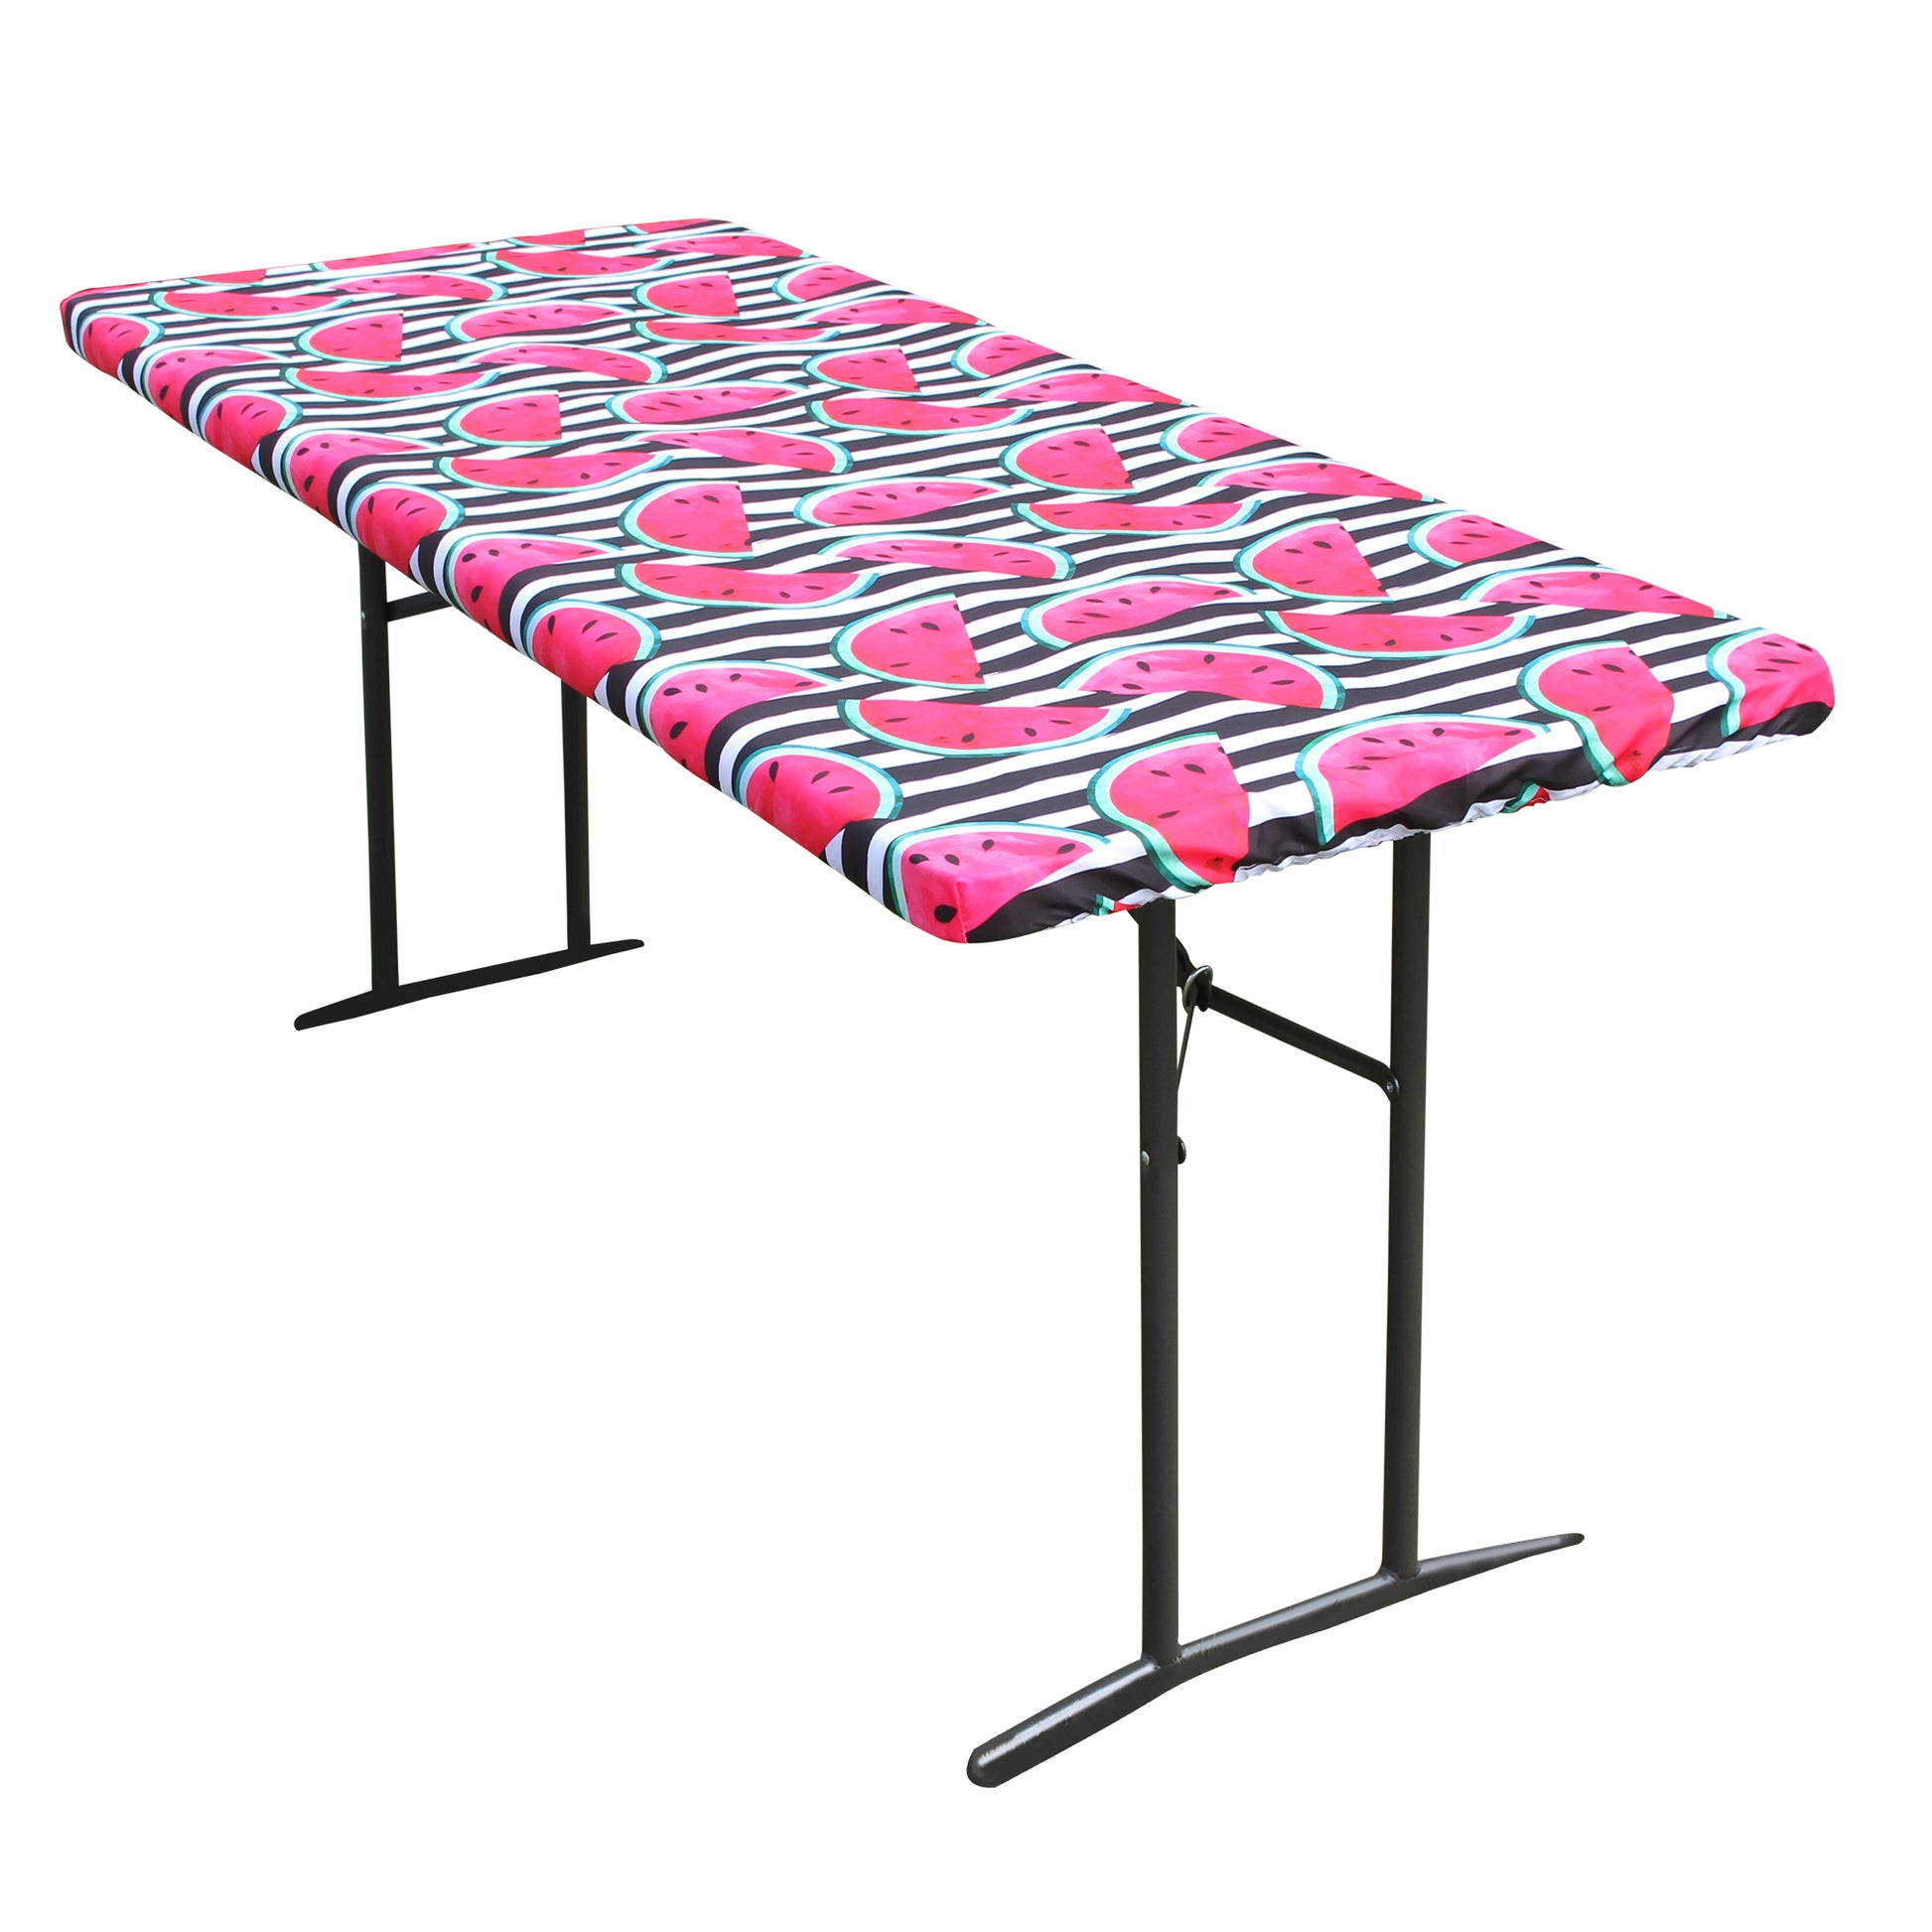 TableCloth PLUS 72" Watermelon Fitted PEVA Vinyl Tablecloth for 6' Folding Tables is easy to clean, water proof, easy to install, and has an elastic rim